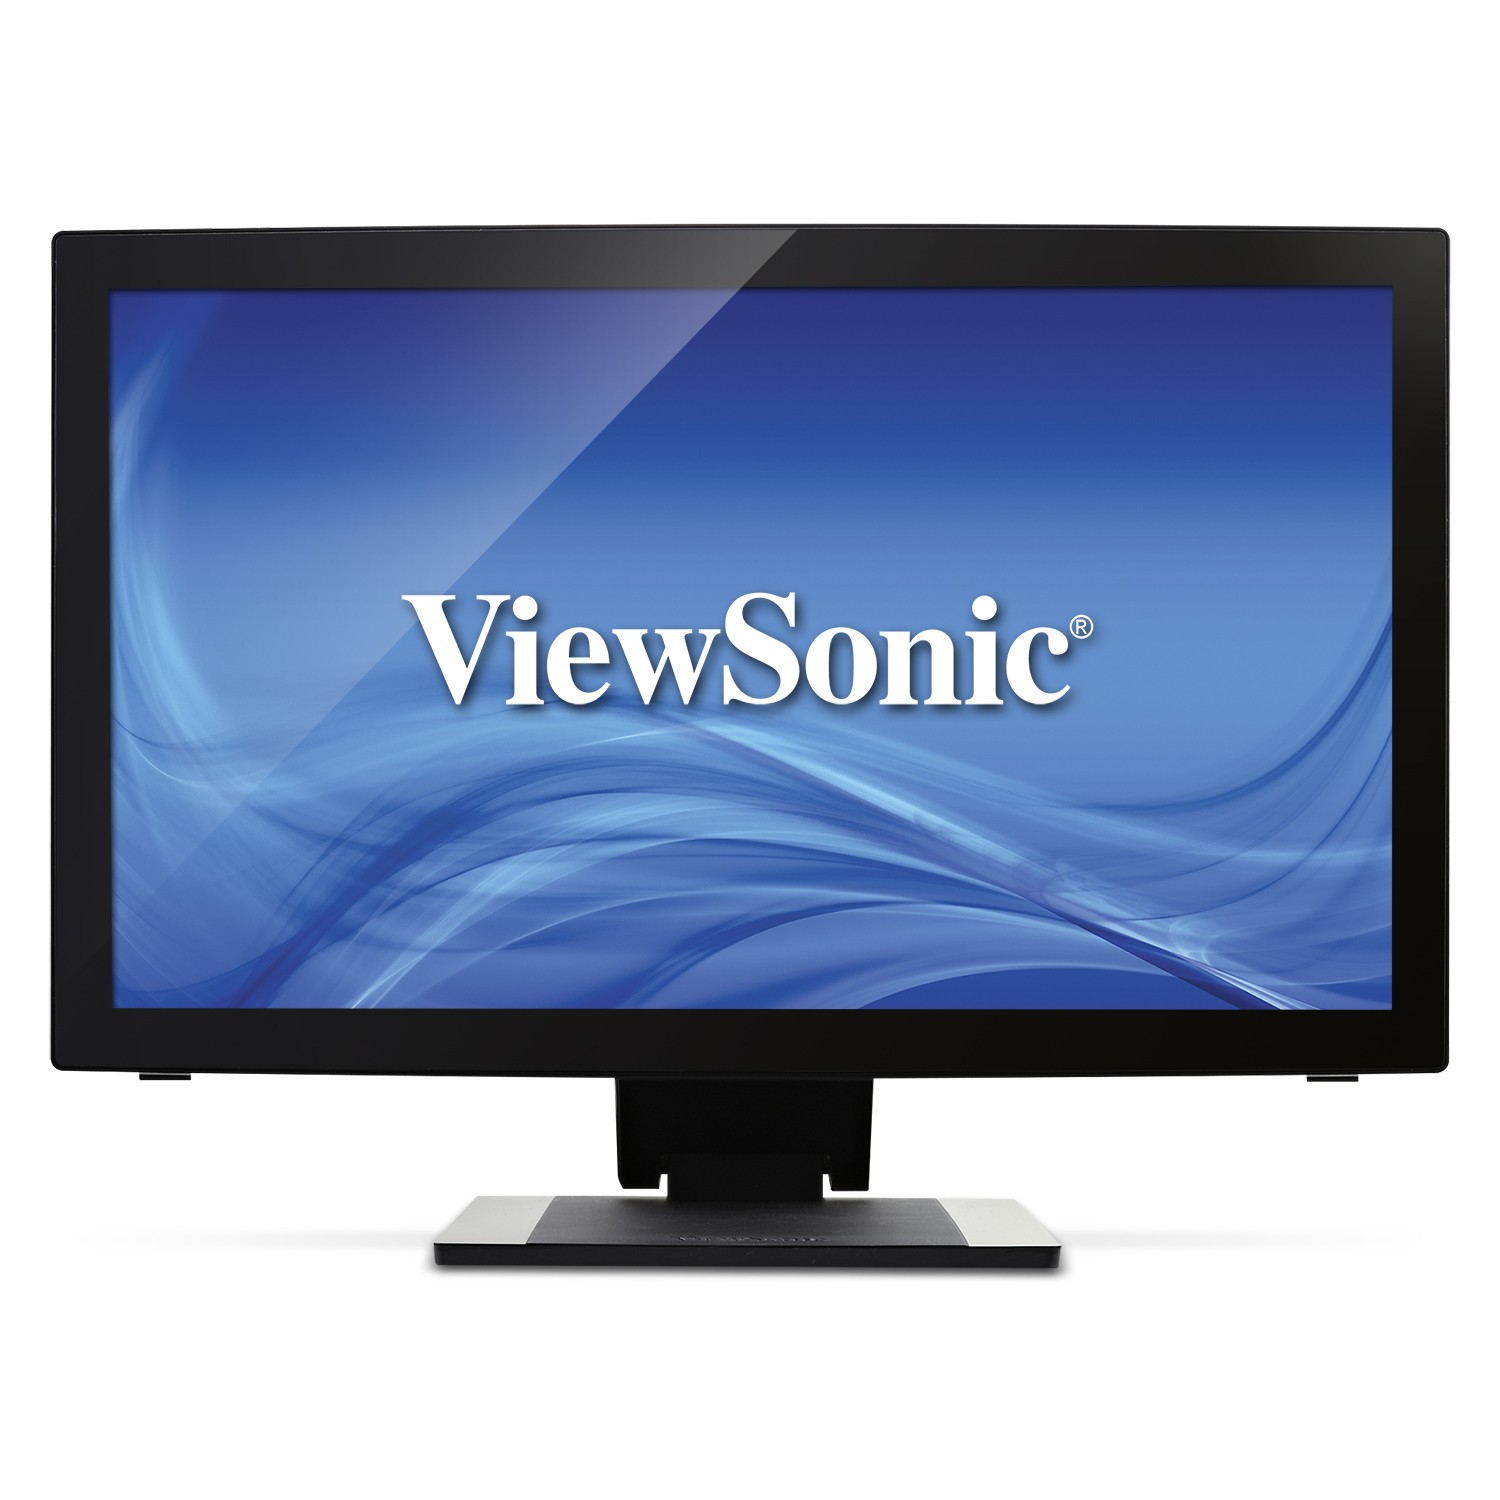 Media asset in full size related to 3dfxzone.it news item entitled as follows: ViewSonic annuncia il monitor multi-touch a 10 punti TD2240 | Image Name: news20782_ViewSonic-TD2240_1.jpg